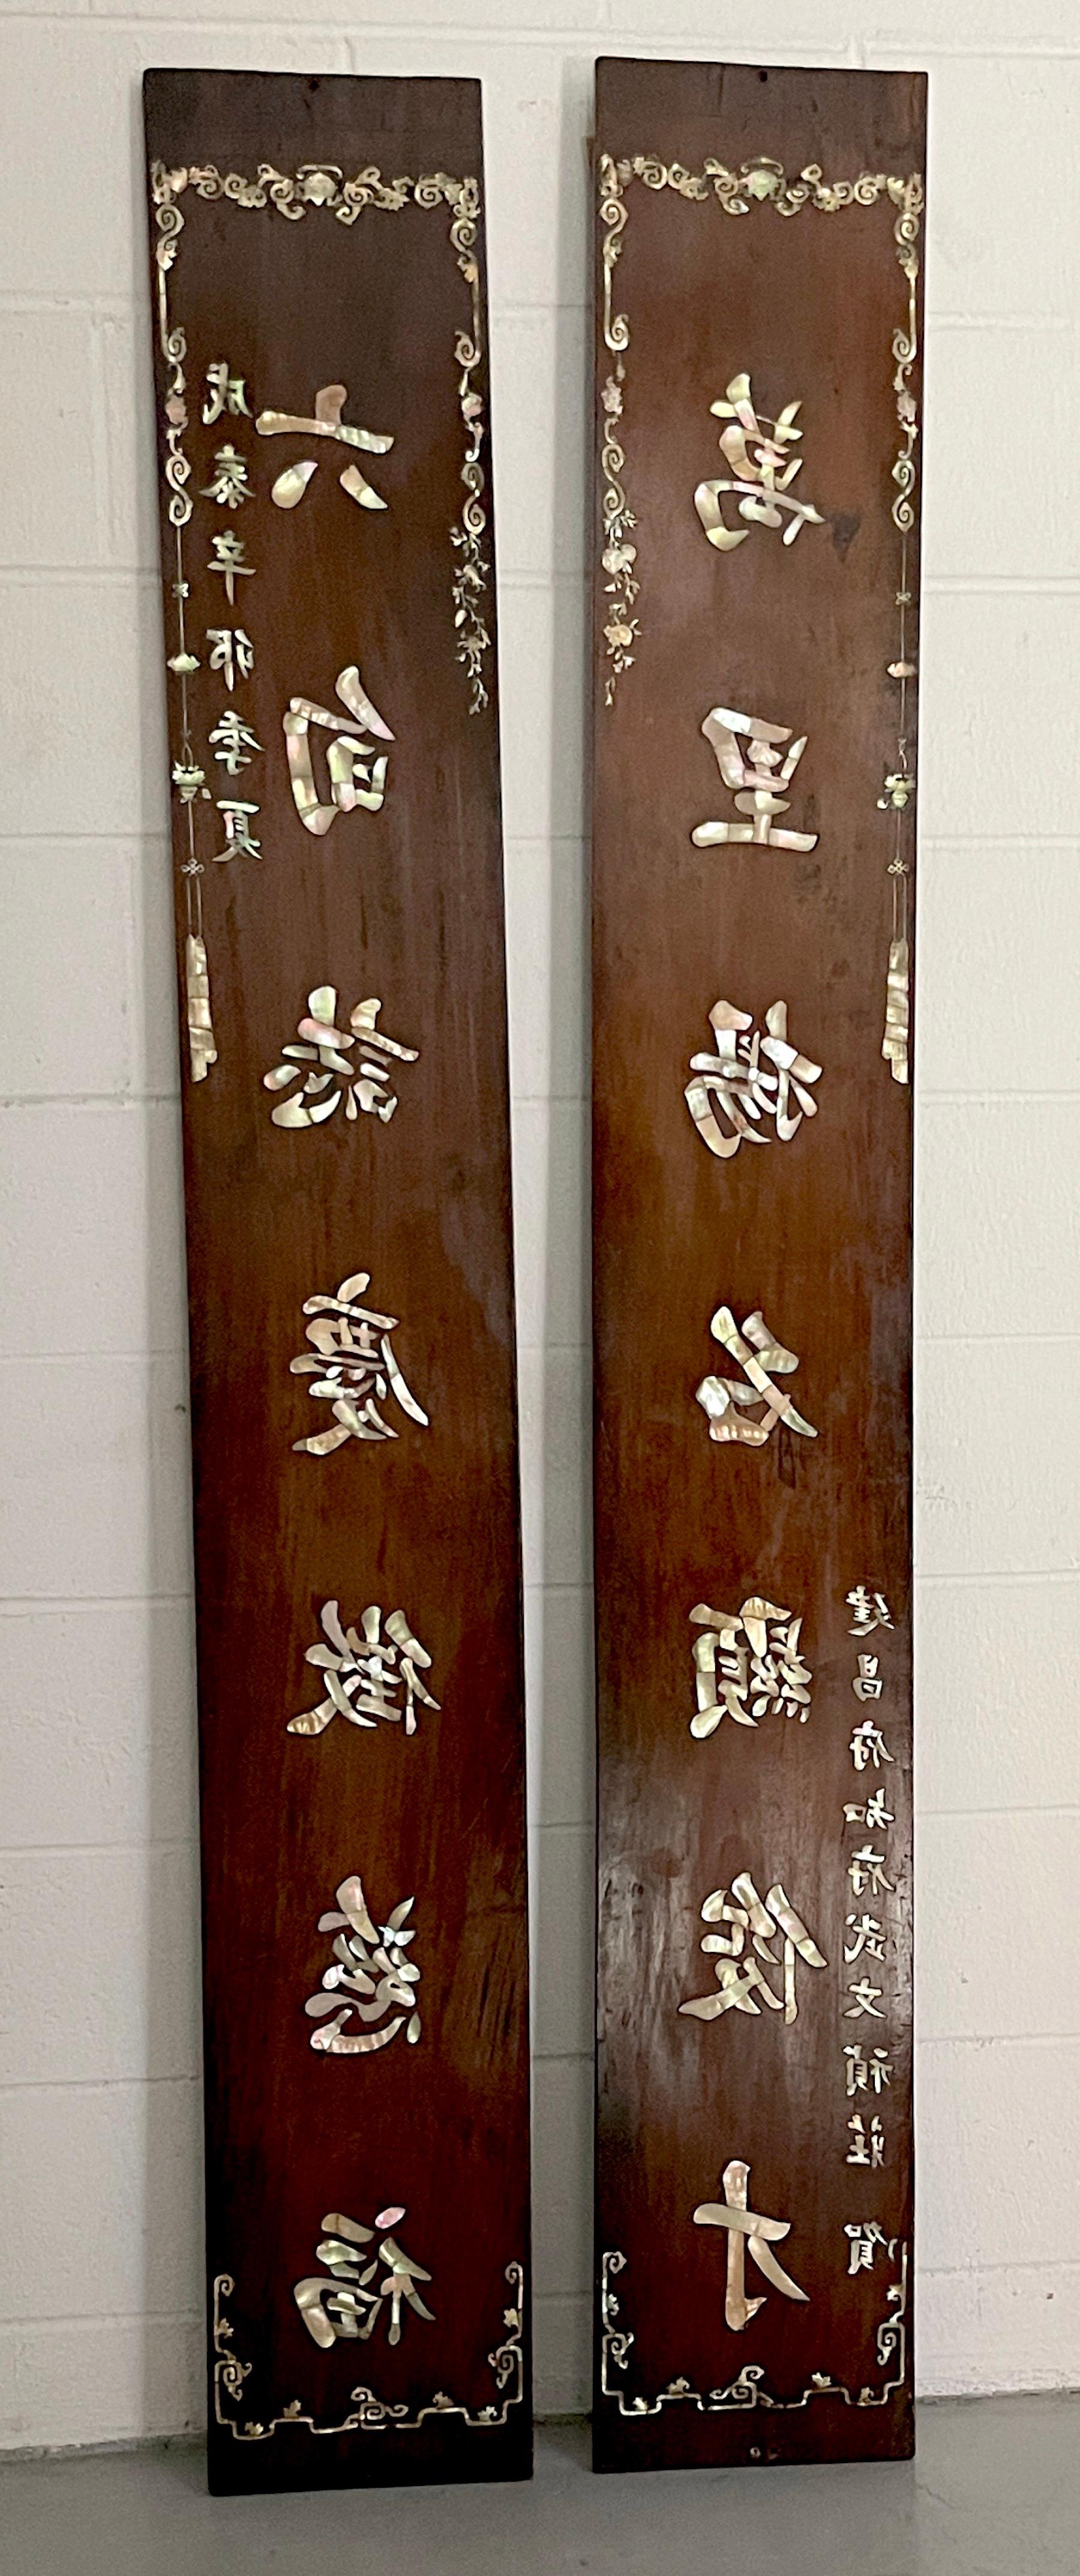 Pair of Antique Asian Mother of Pearl Inlaid Hardwood Panels.
A pair or Vietnamese works Each one standing over 6-Feet tall, Intricately inlaid with numerous characters and threads, ropes and tassels.

The work has the characters 成泰 Thành Thái. 成泰